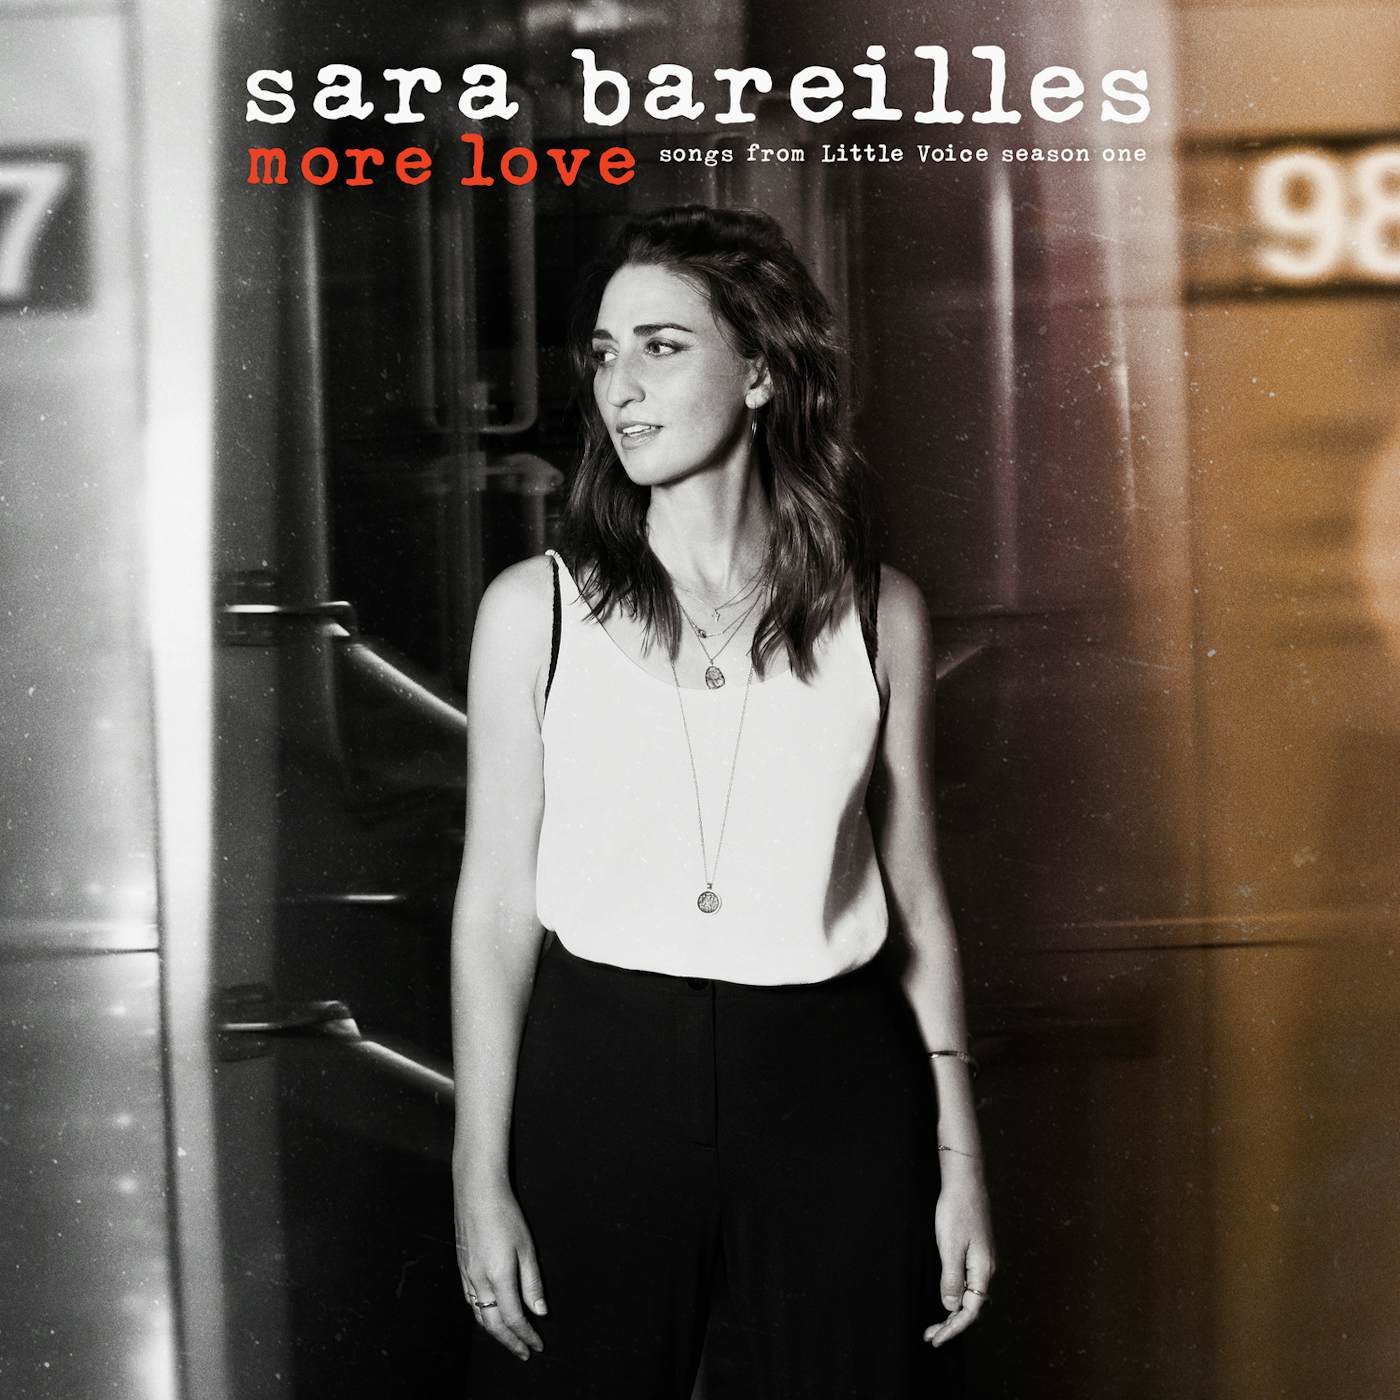 Sara Bareilles MORE LOVE: SONGS FROM THE LITTLE VOICE SEASON ONE (150G) Vinyl Record